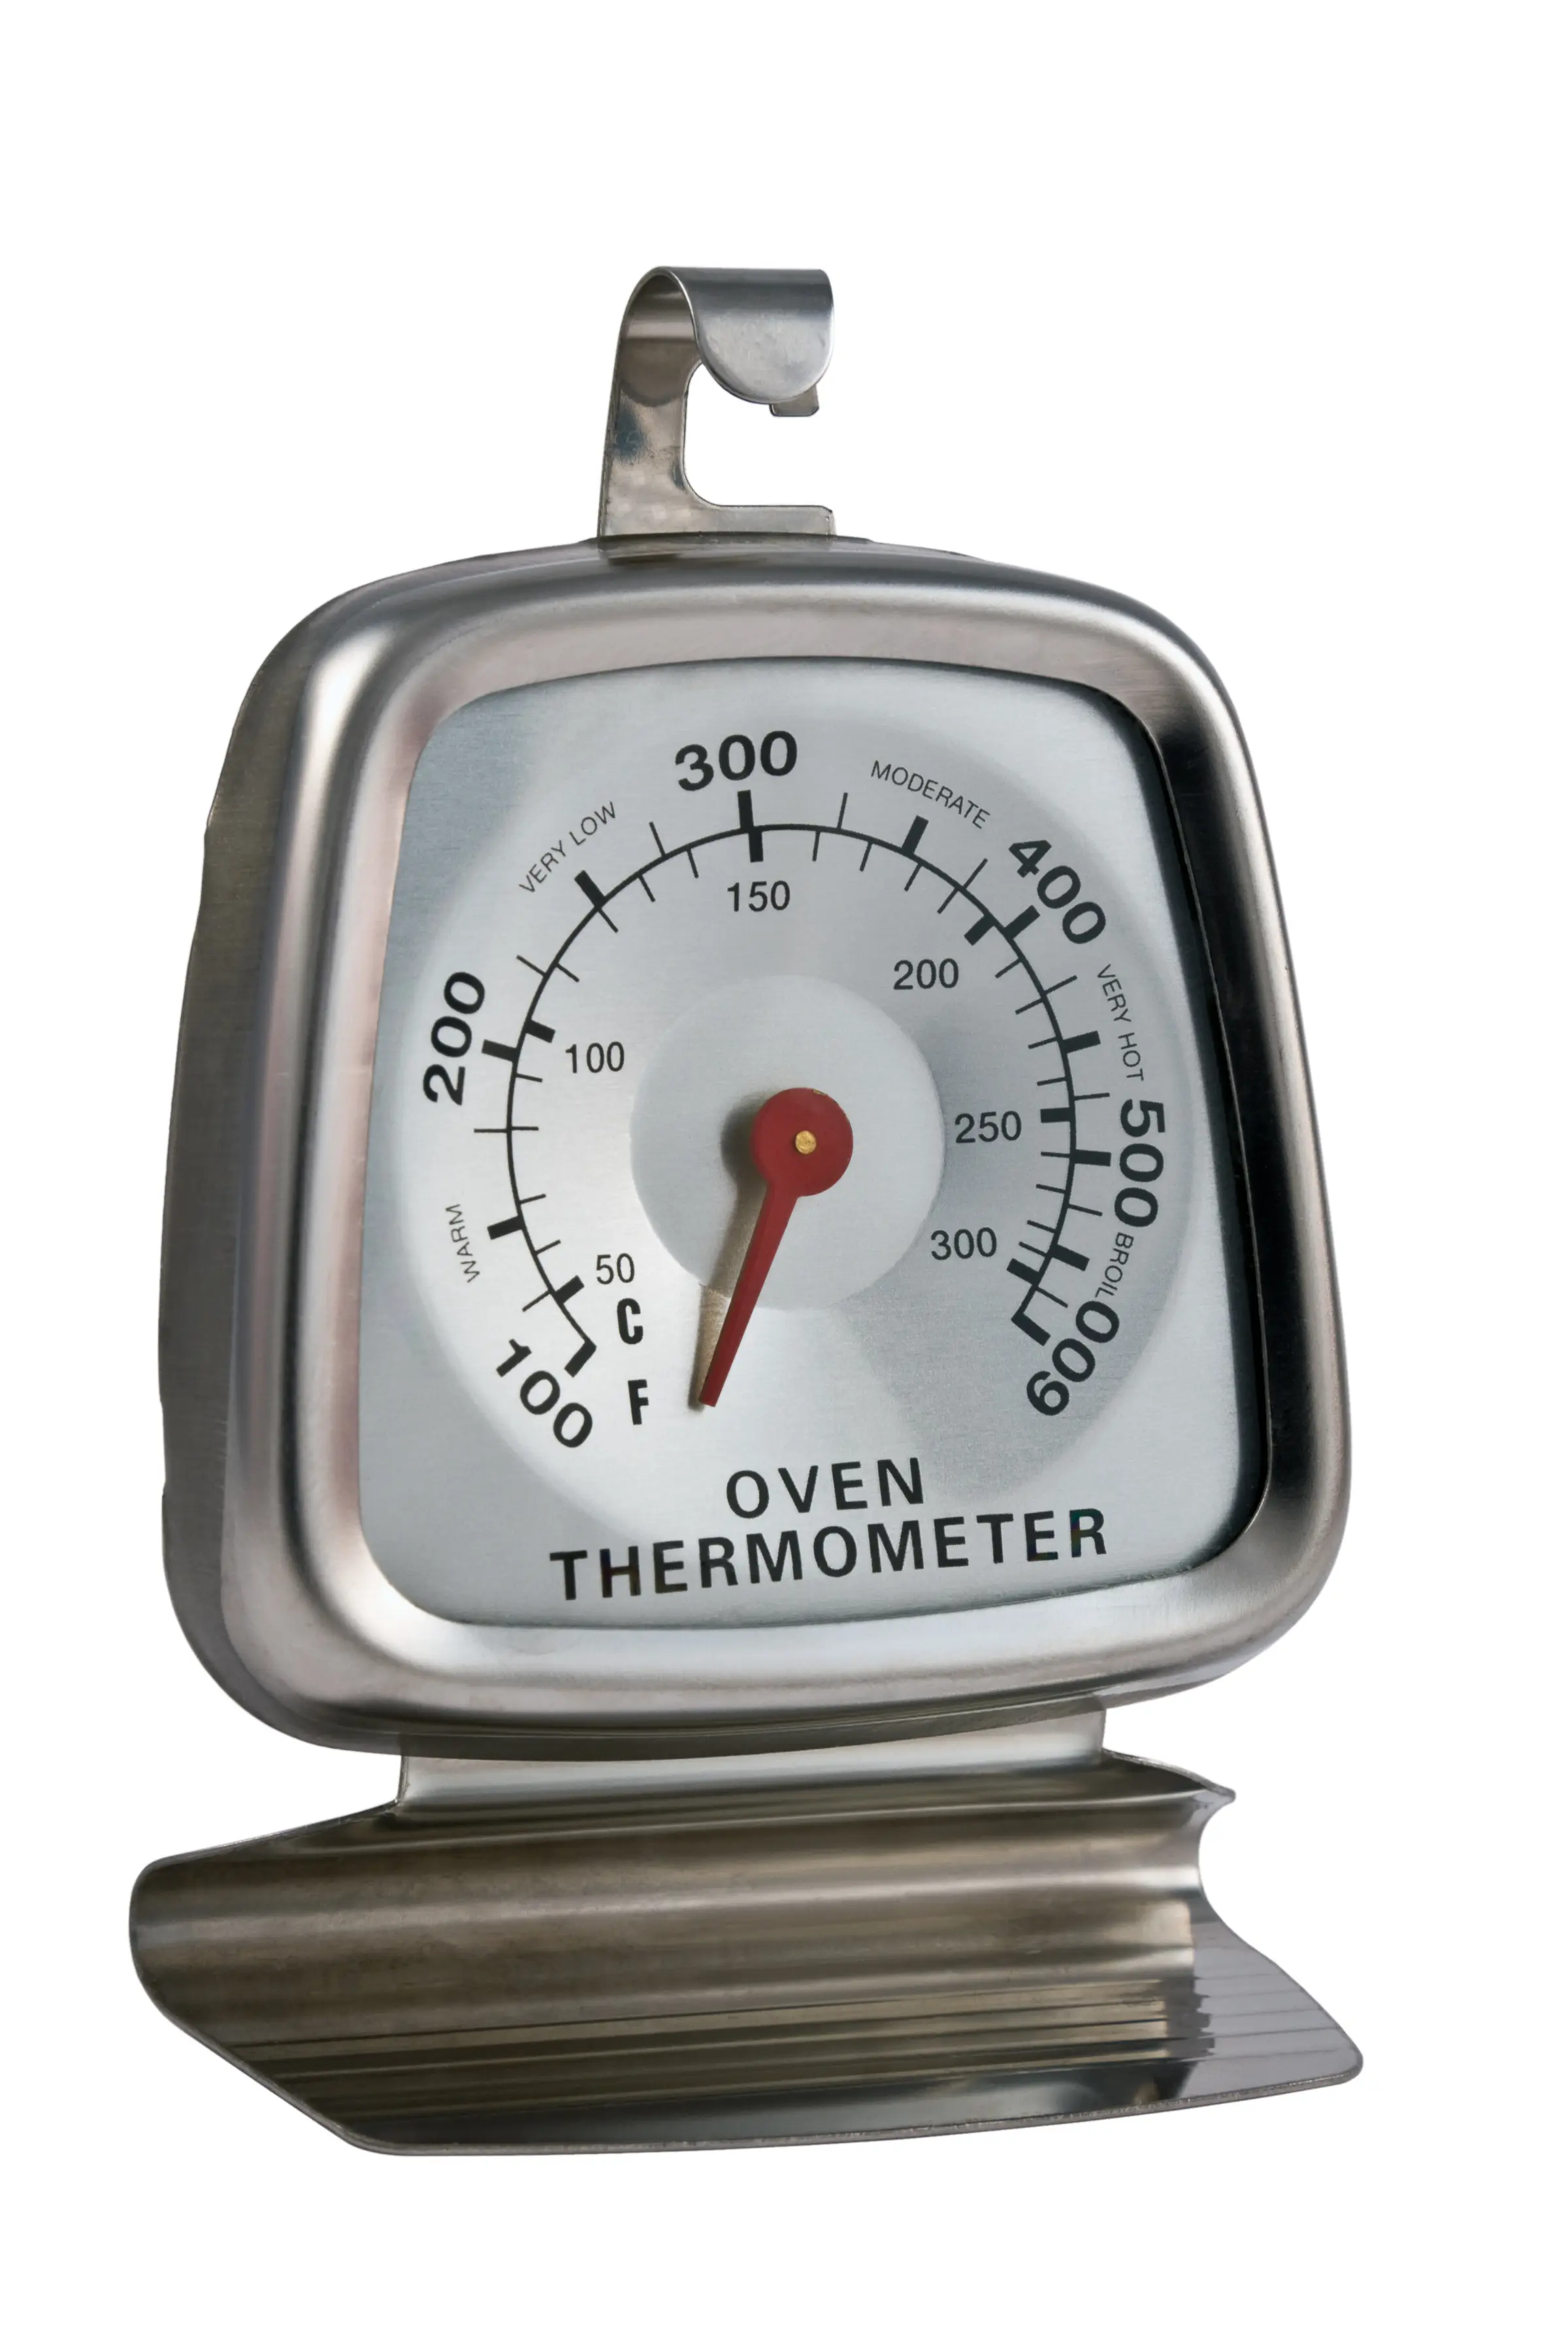 An oven thermometer on a bright white back background